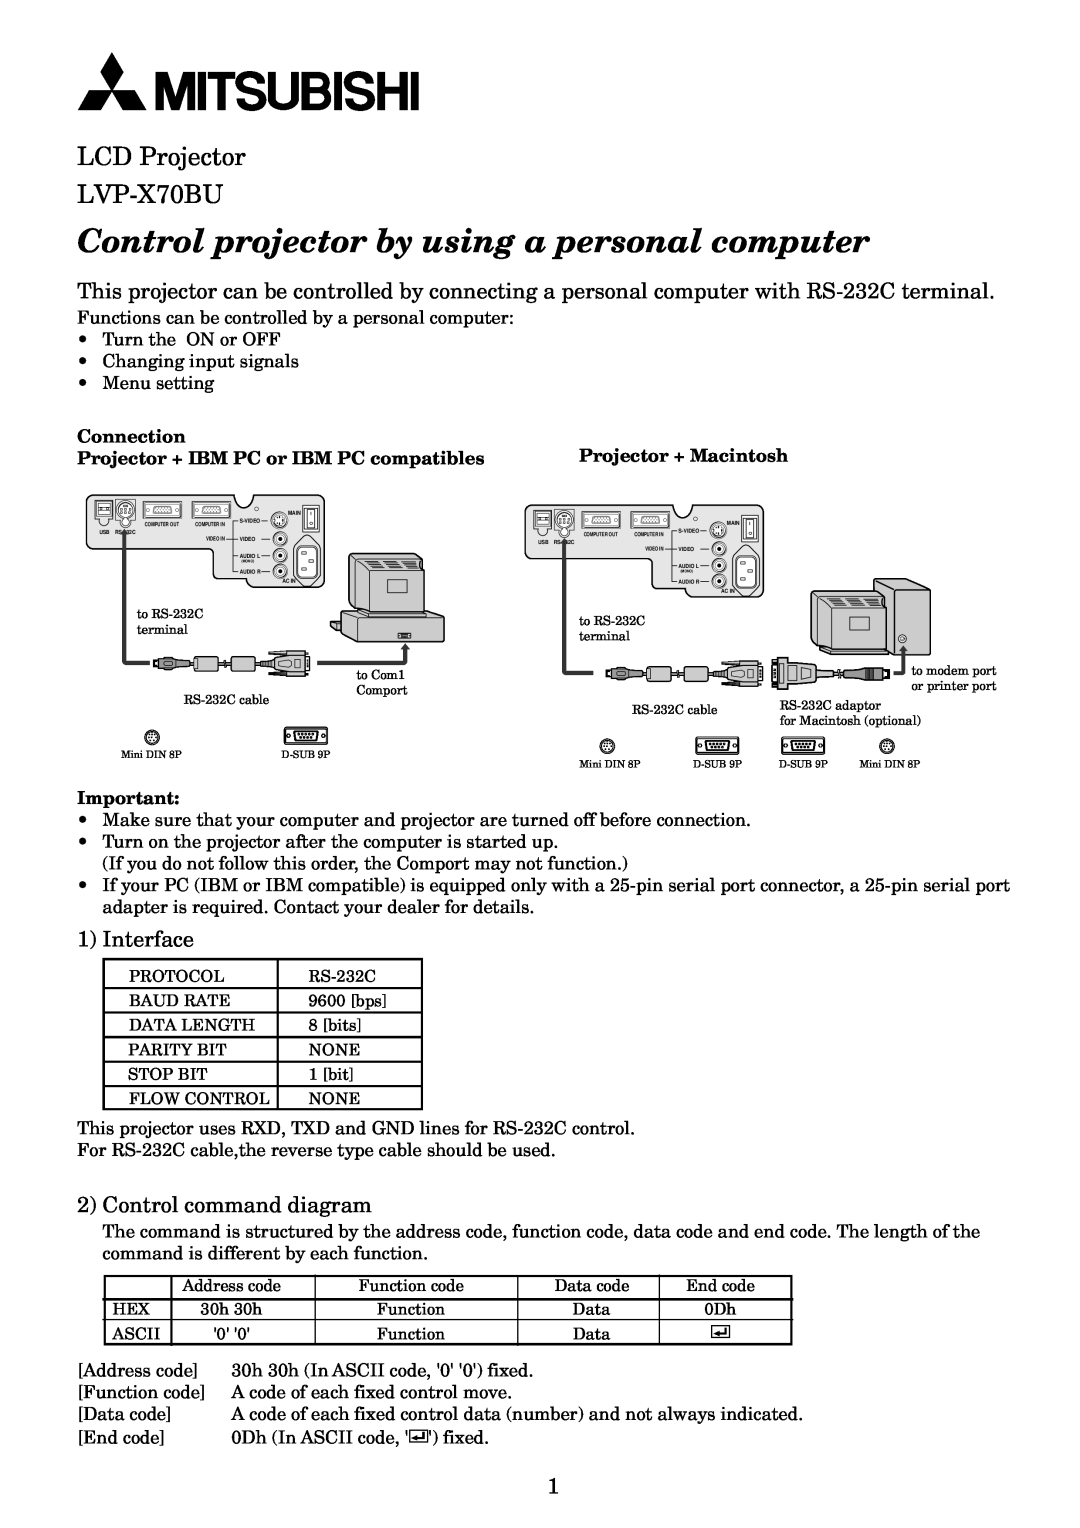 Mitsubishi Electronics user manual Control projector by using a personal computer, LCD Projector LVP-X70BU, Connection 